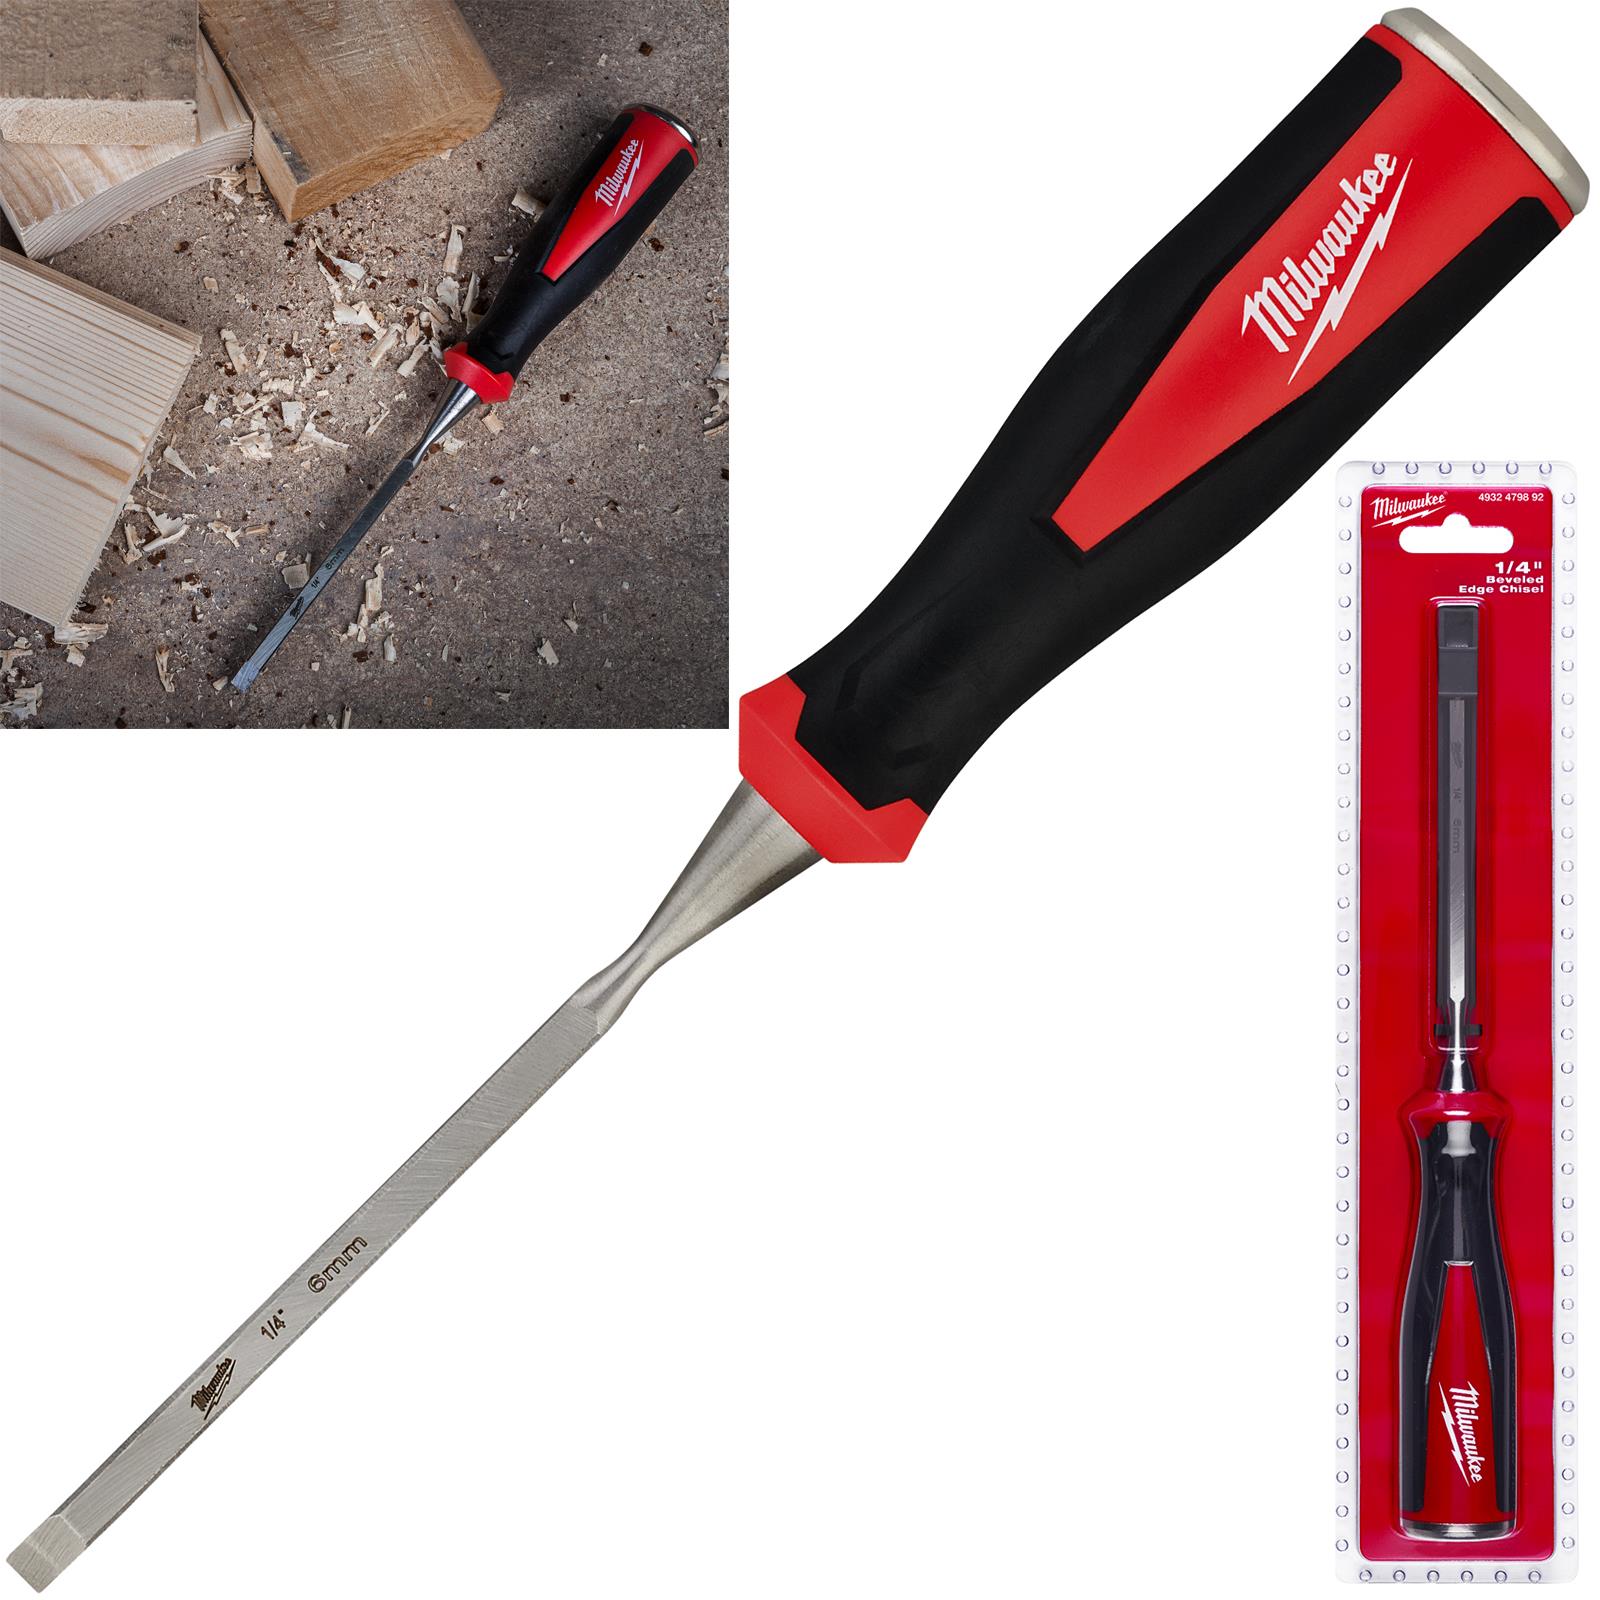 Milwaukee Beveled Edge Wood Chisel 6mm 1/4" All Metal Core with Striking Cap